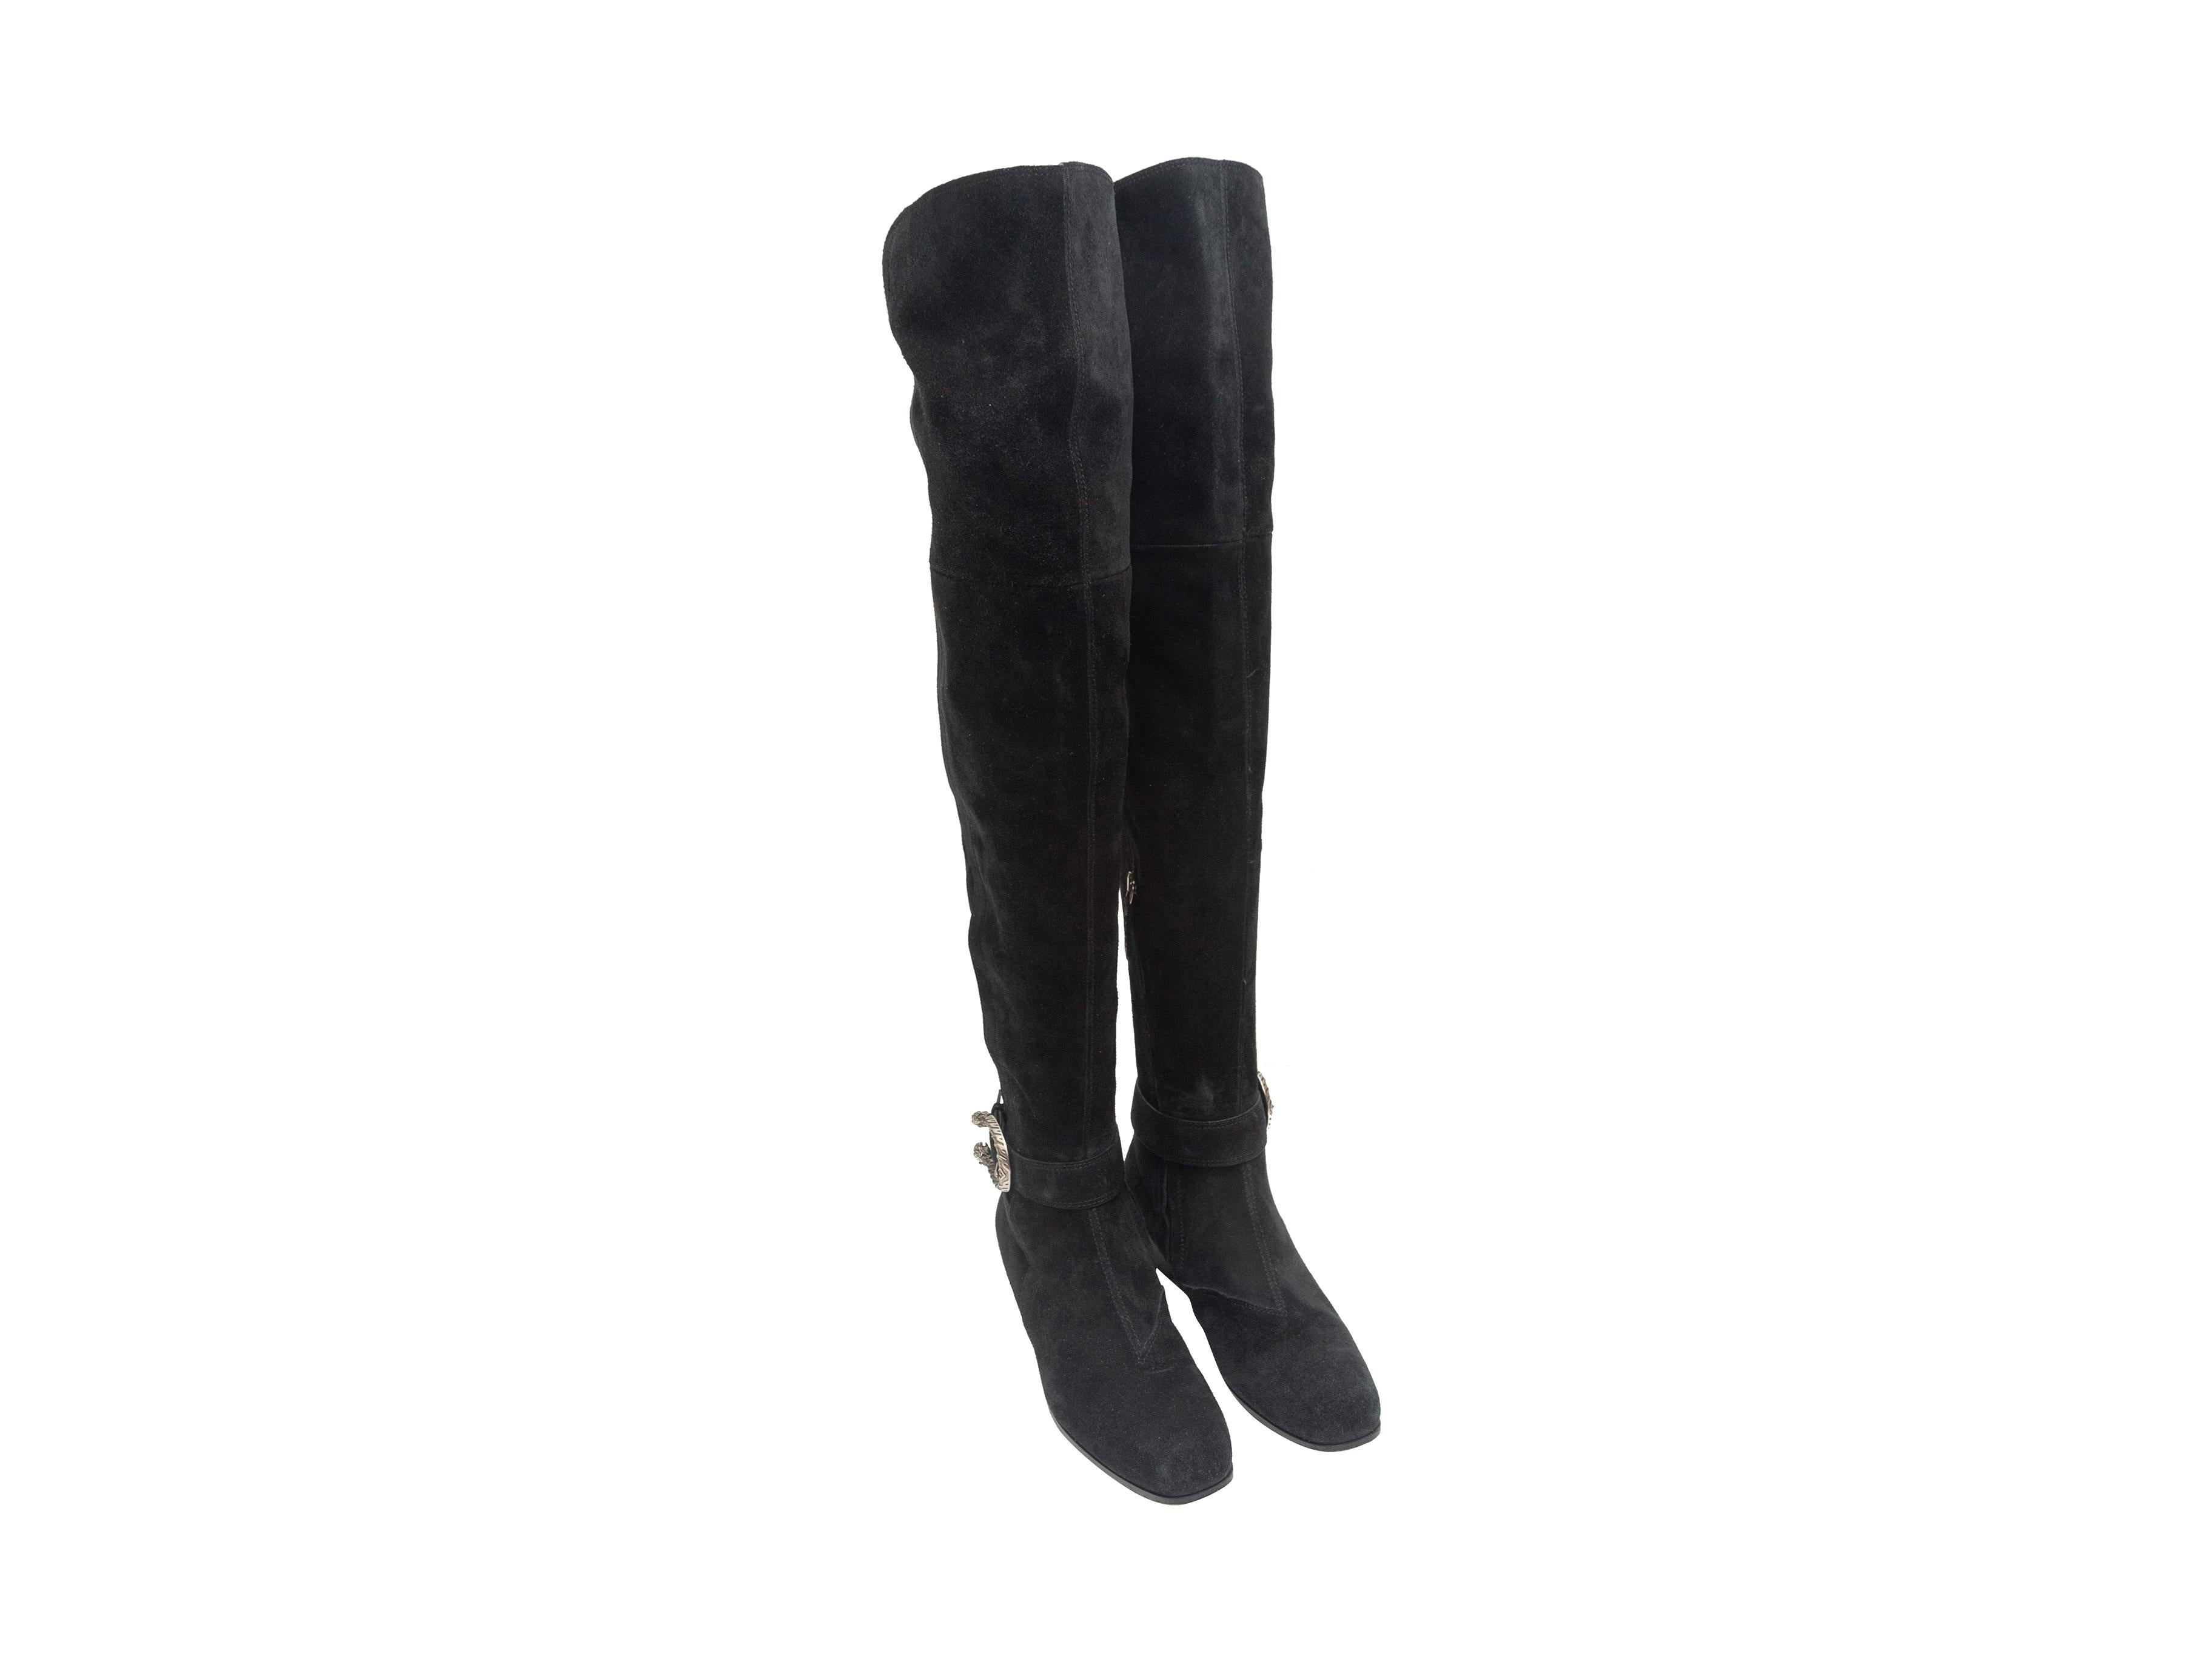 Product details: Black suede Dionysus thigh-high boots by Gucci. Silver-tone buckle accents at sides. Designer size 37. 1